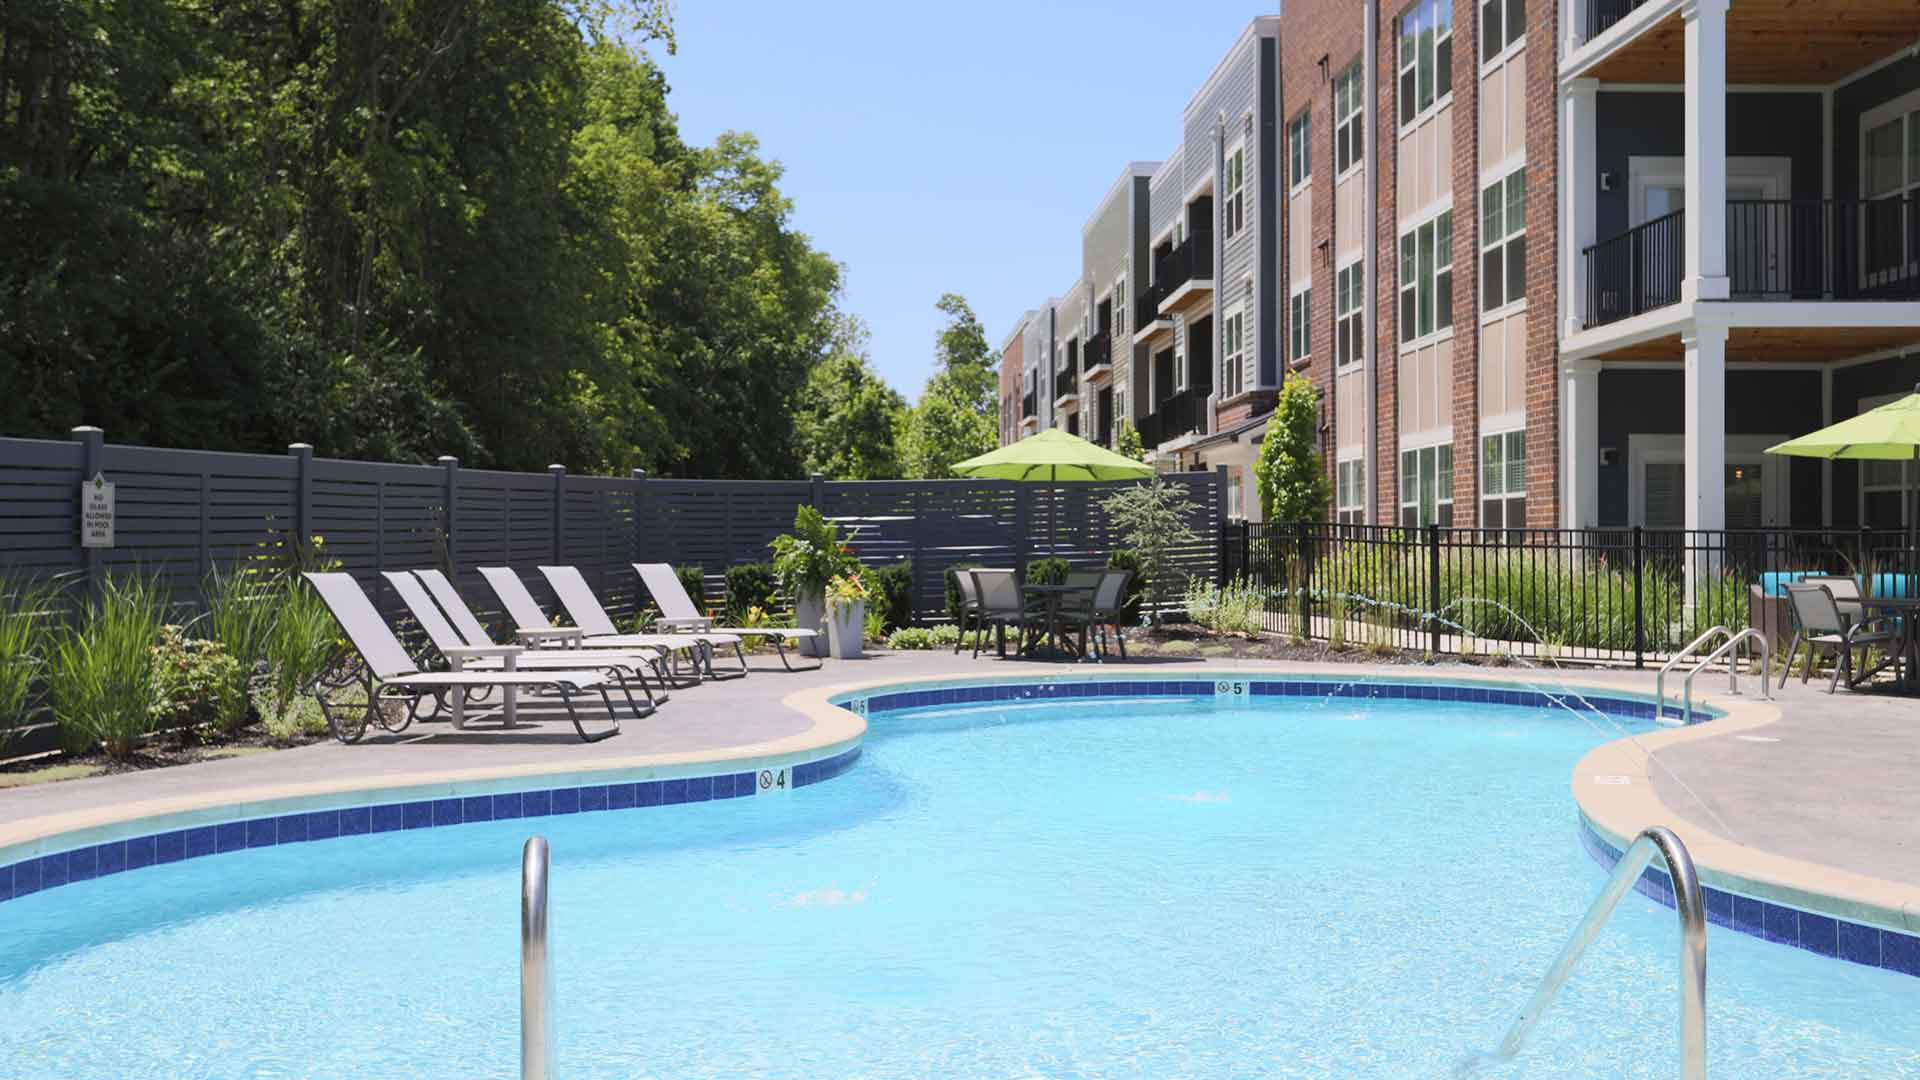 Outdoor pool and lounge area at Element Oakwood.